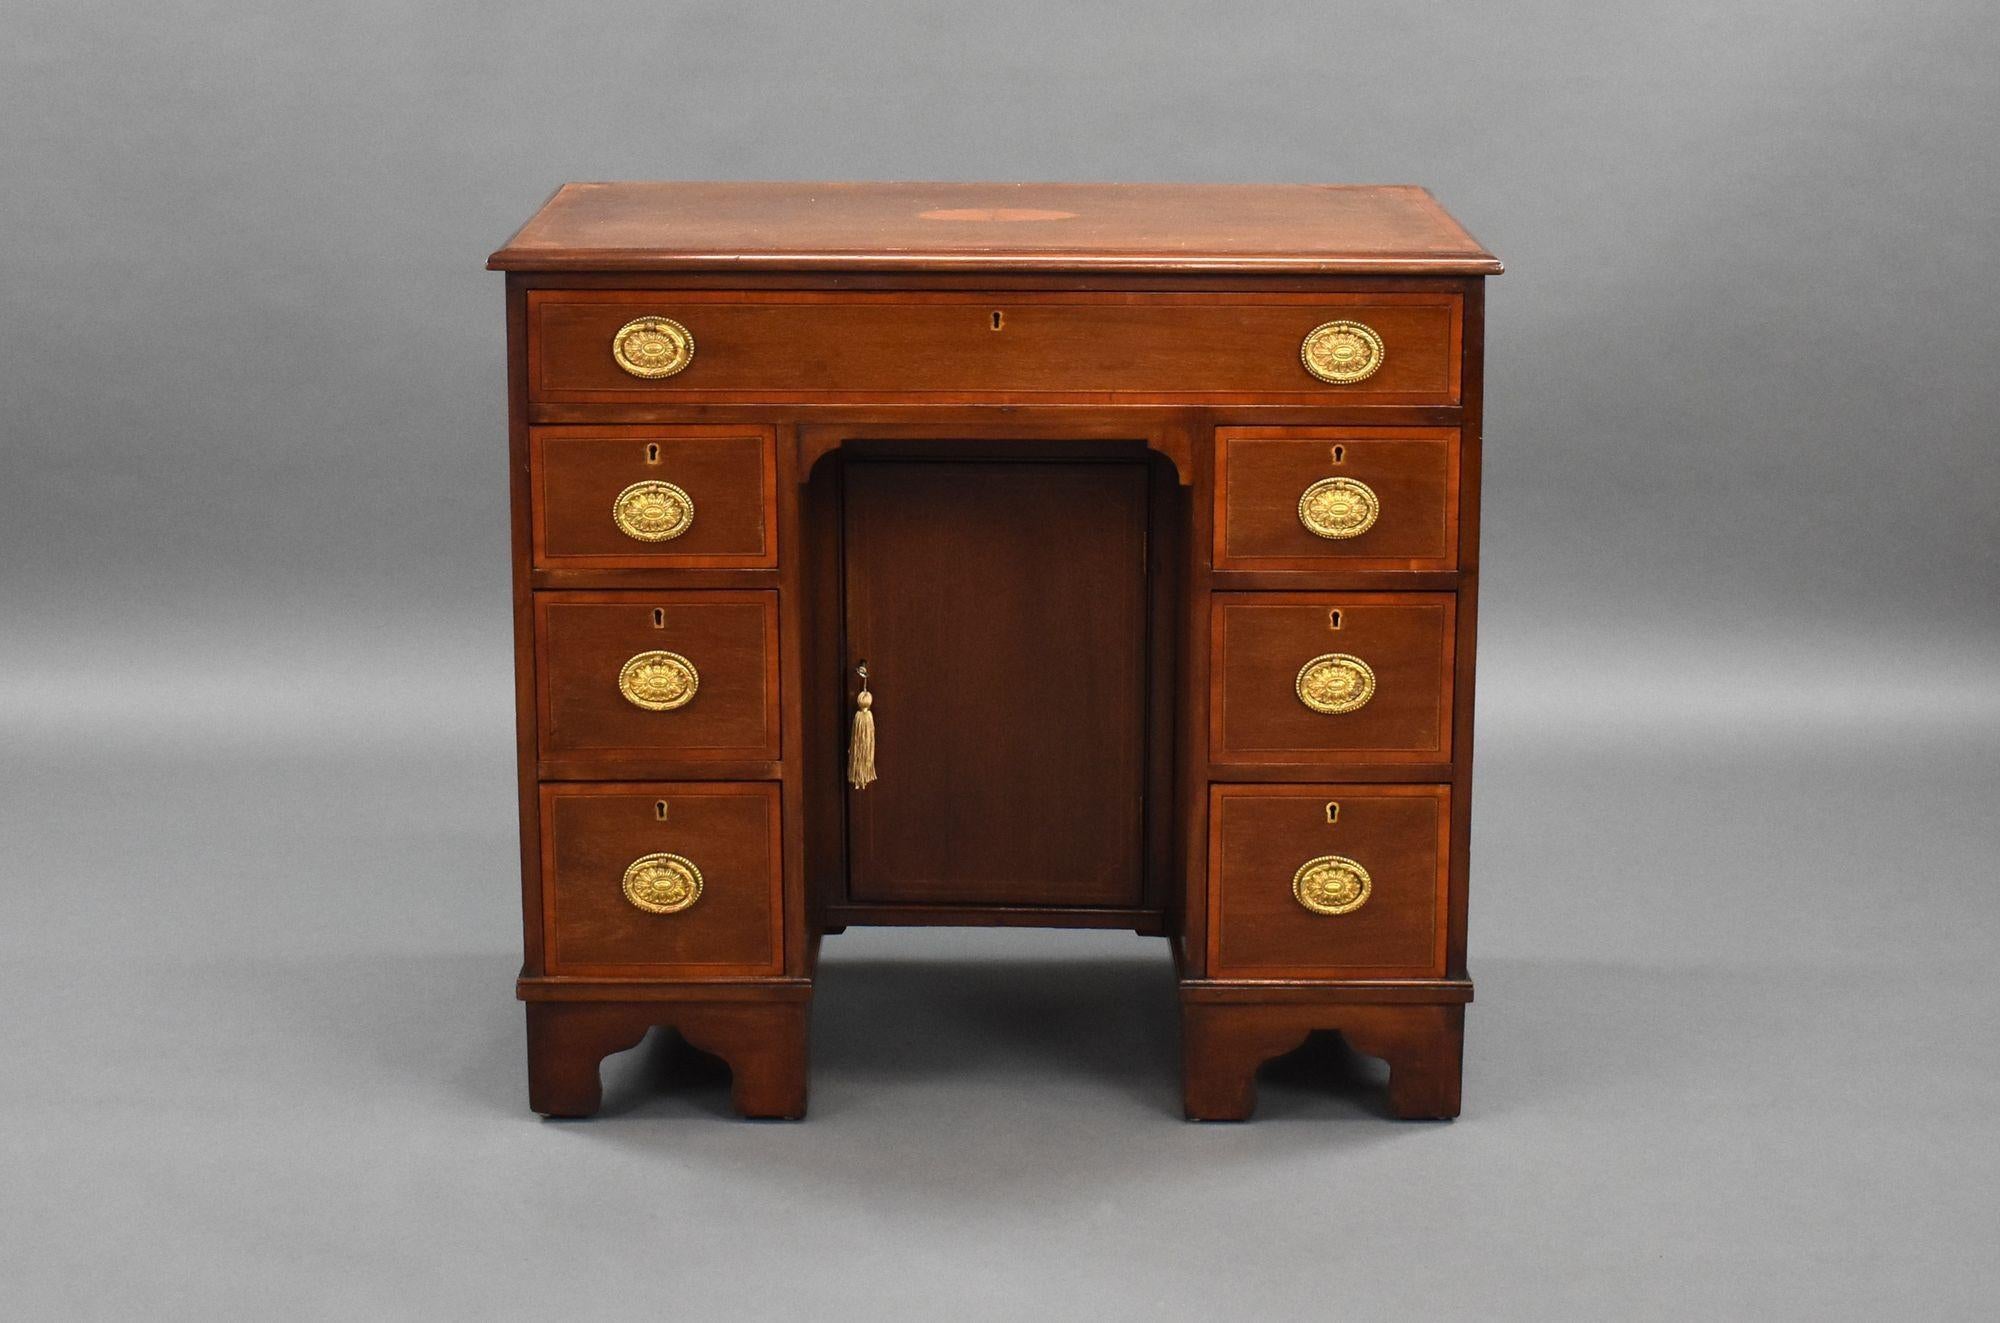 For sale is a good quality Edwardian mahogany knee hole desk, having an arrangement of seven drawers and a cupboard to the centre. The desk stands on bracket feet and is in very good condition.

Width: 84cm Depth: 44cm Height: 78cm